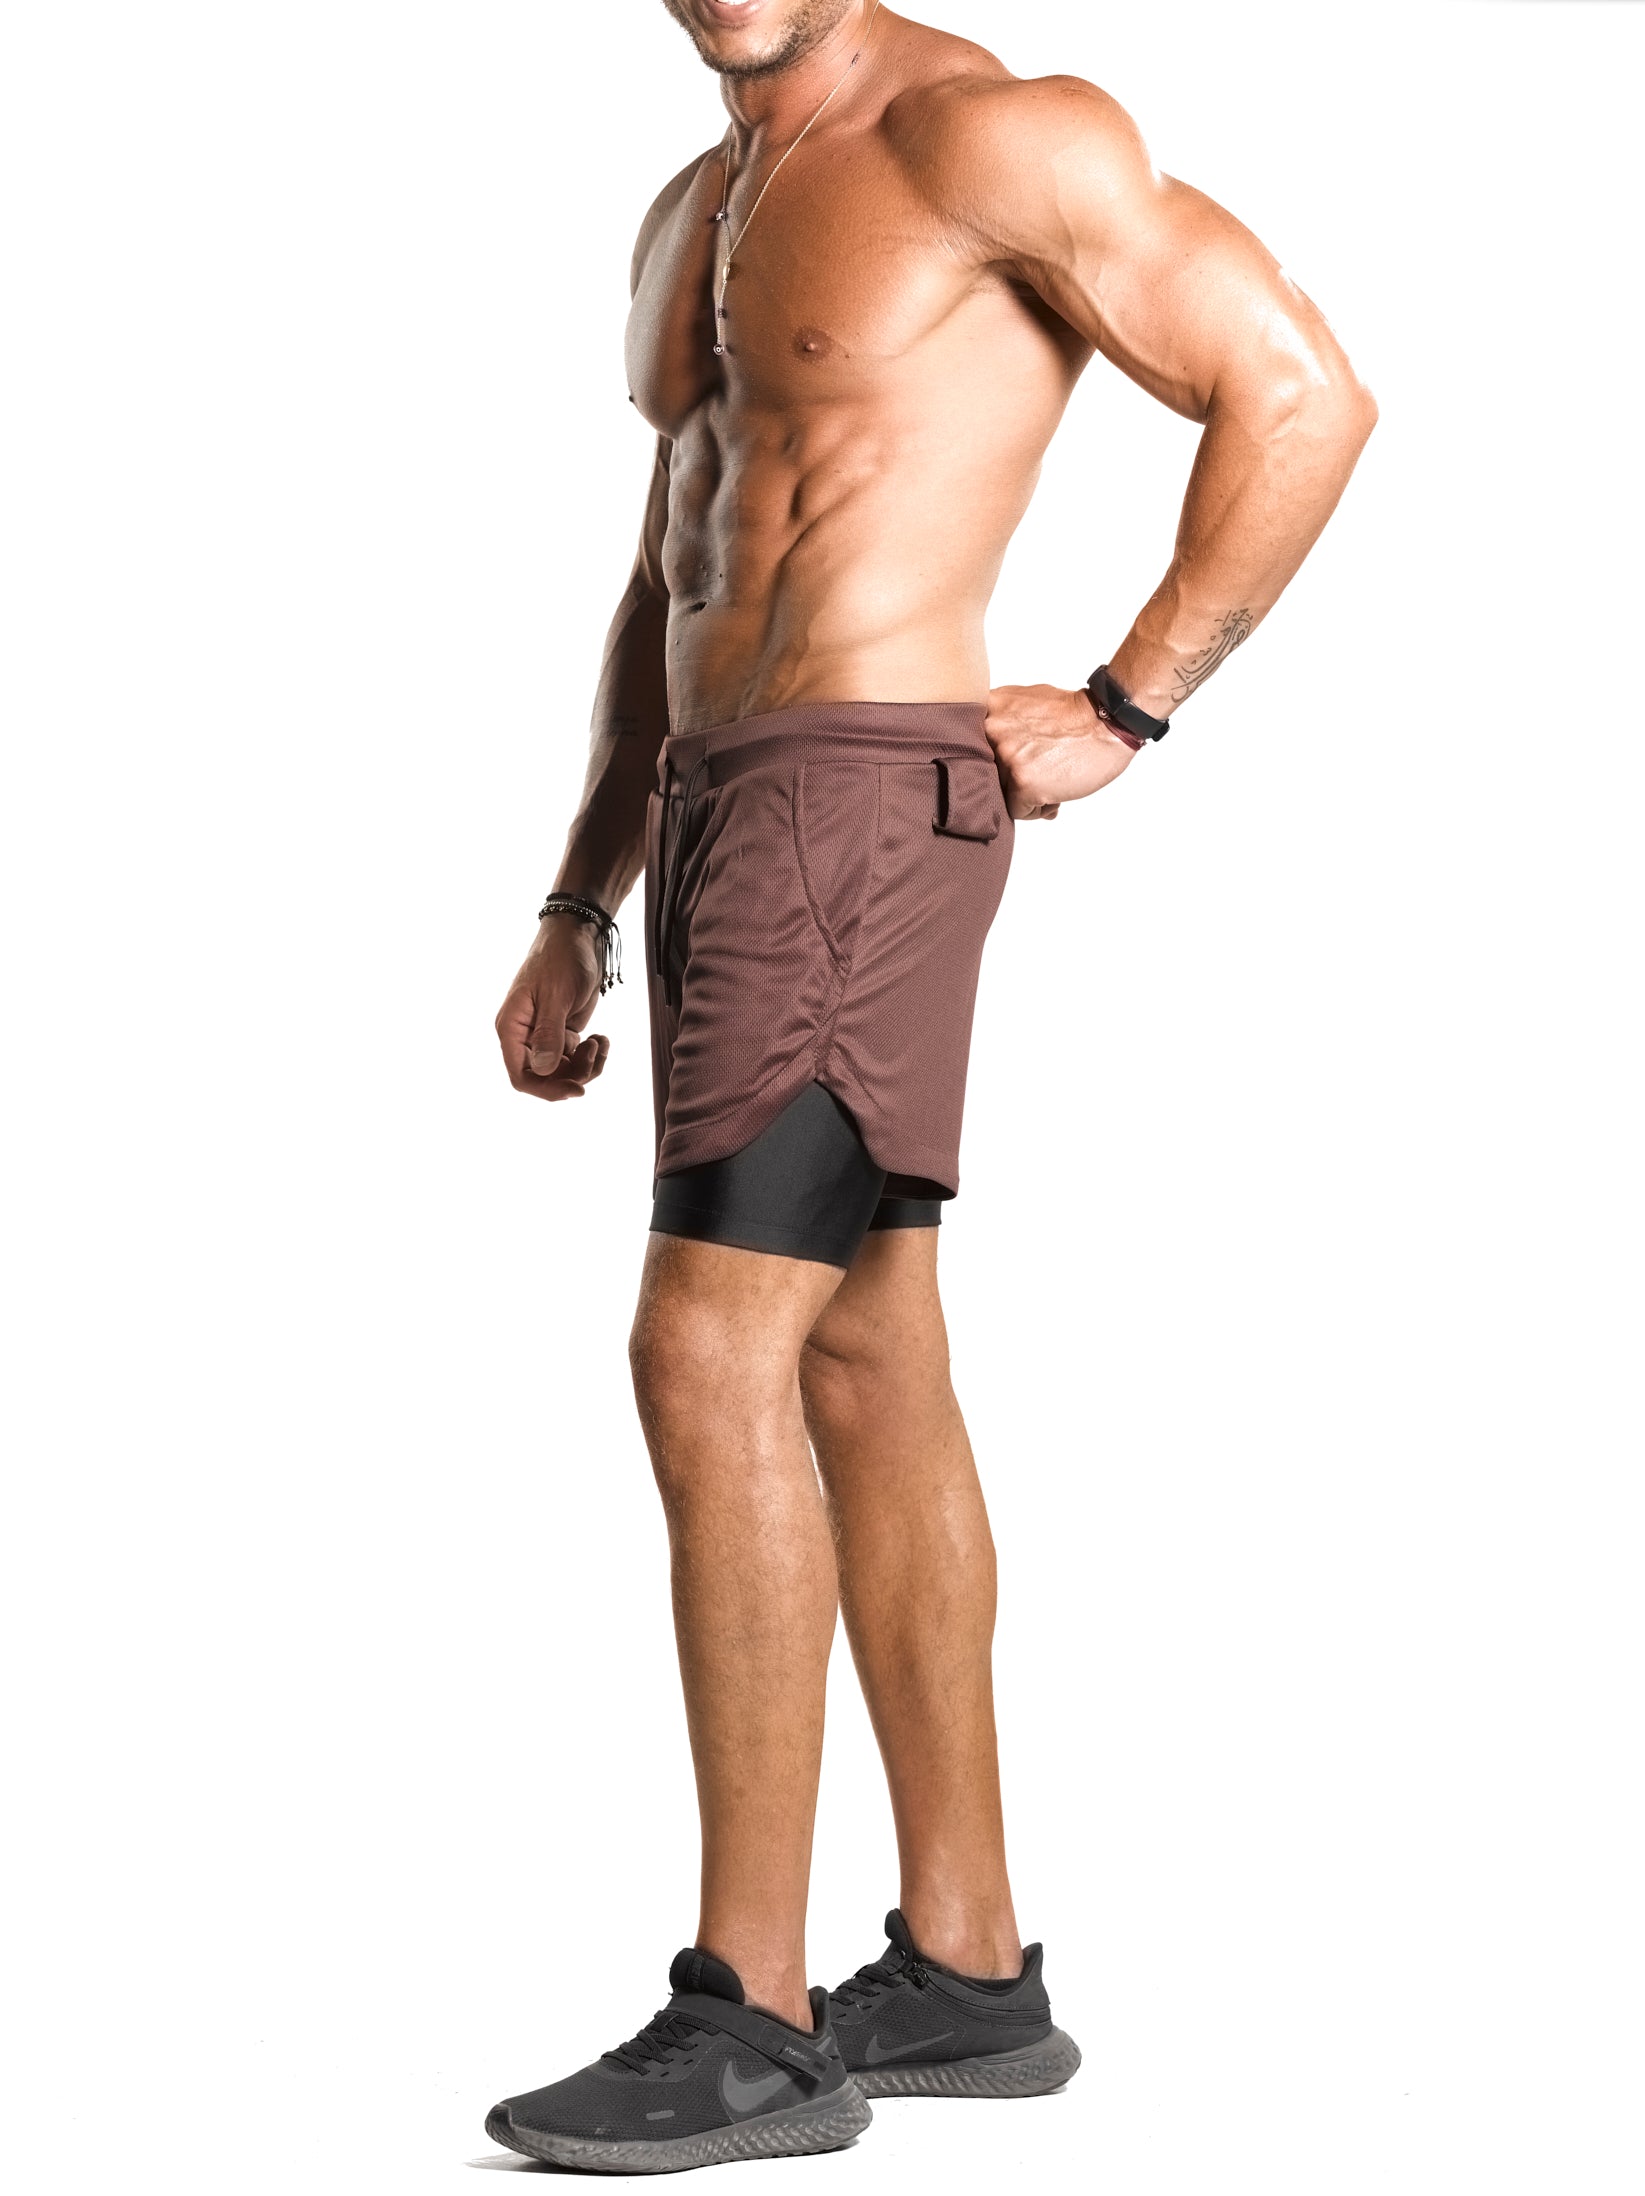 2 in 1 Functional Training Shorts [Brown/Black] - Shorts - Gym Apparel Egypt